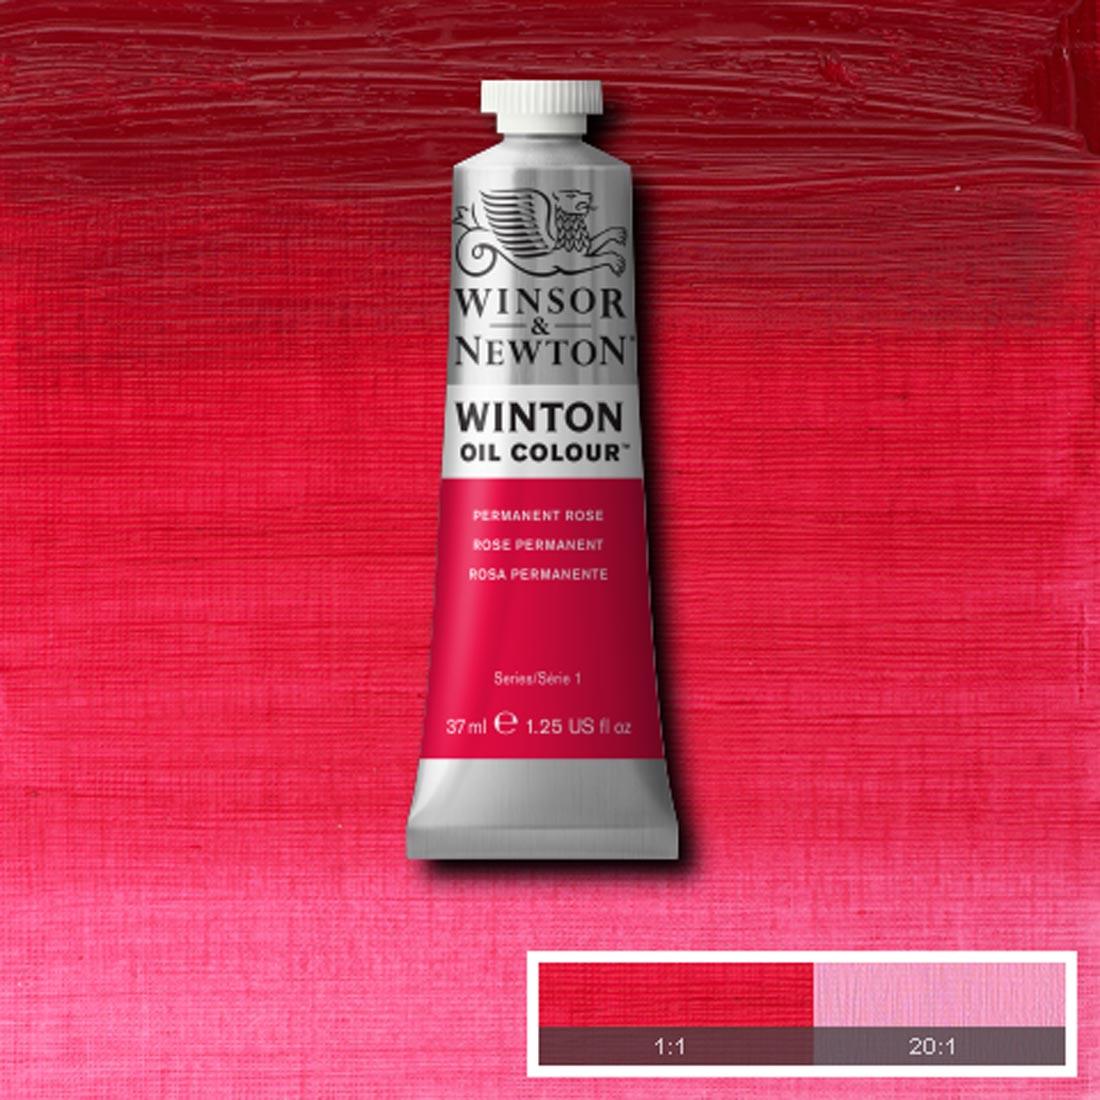 Tube of Permanent Rose Winsor & Newton Winton Oil Colour with a paint swatch for the background